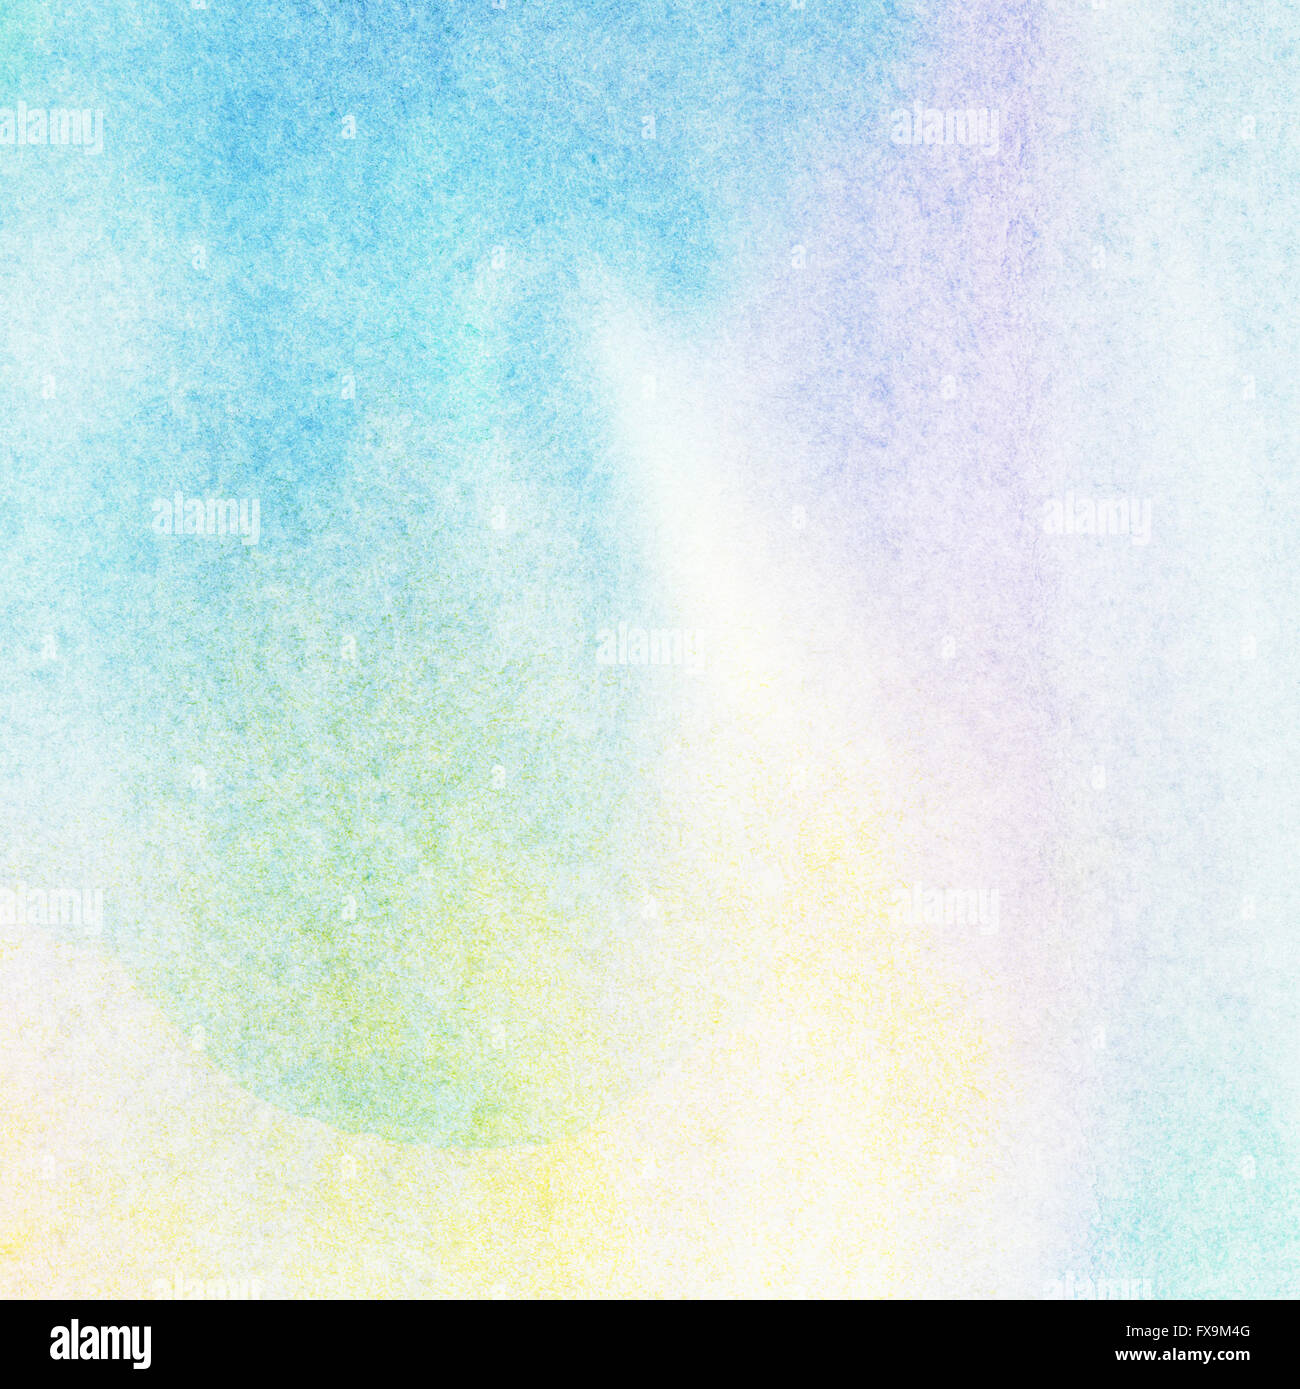 Light abstract colorful painted watercolor splashes background Stock Photo